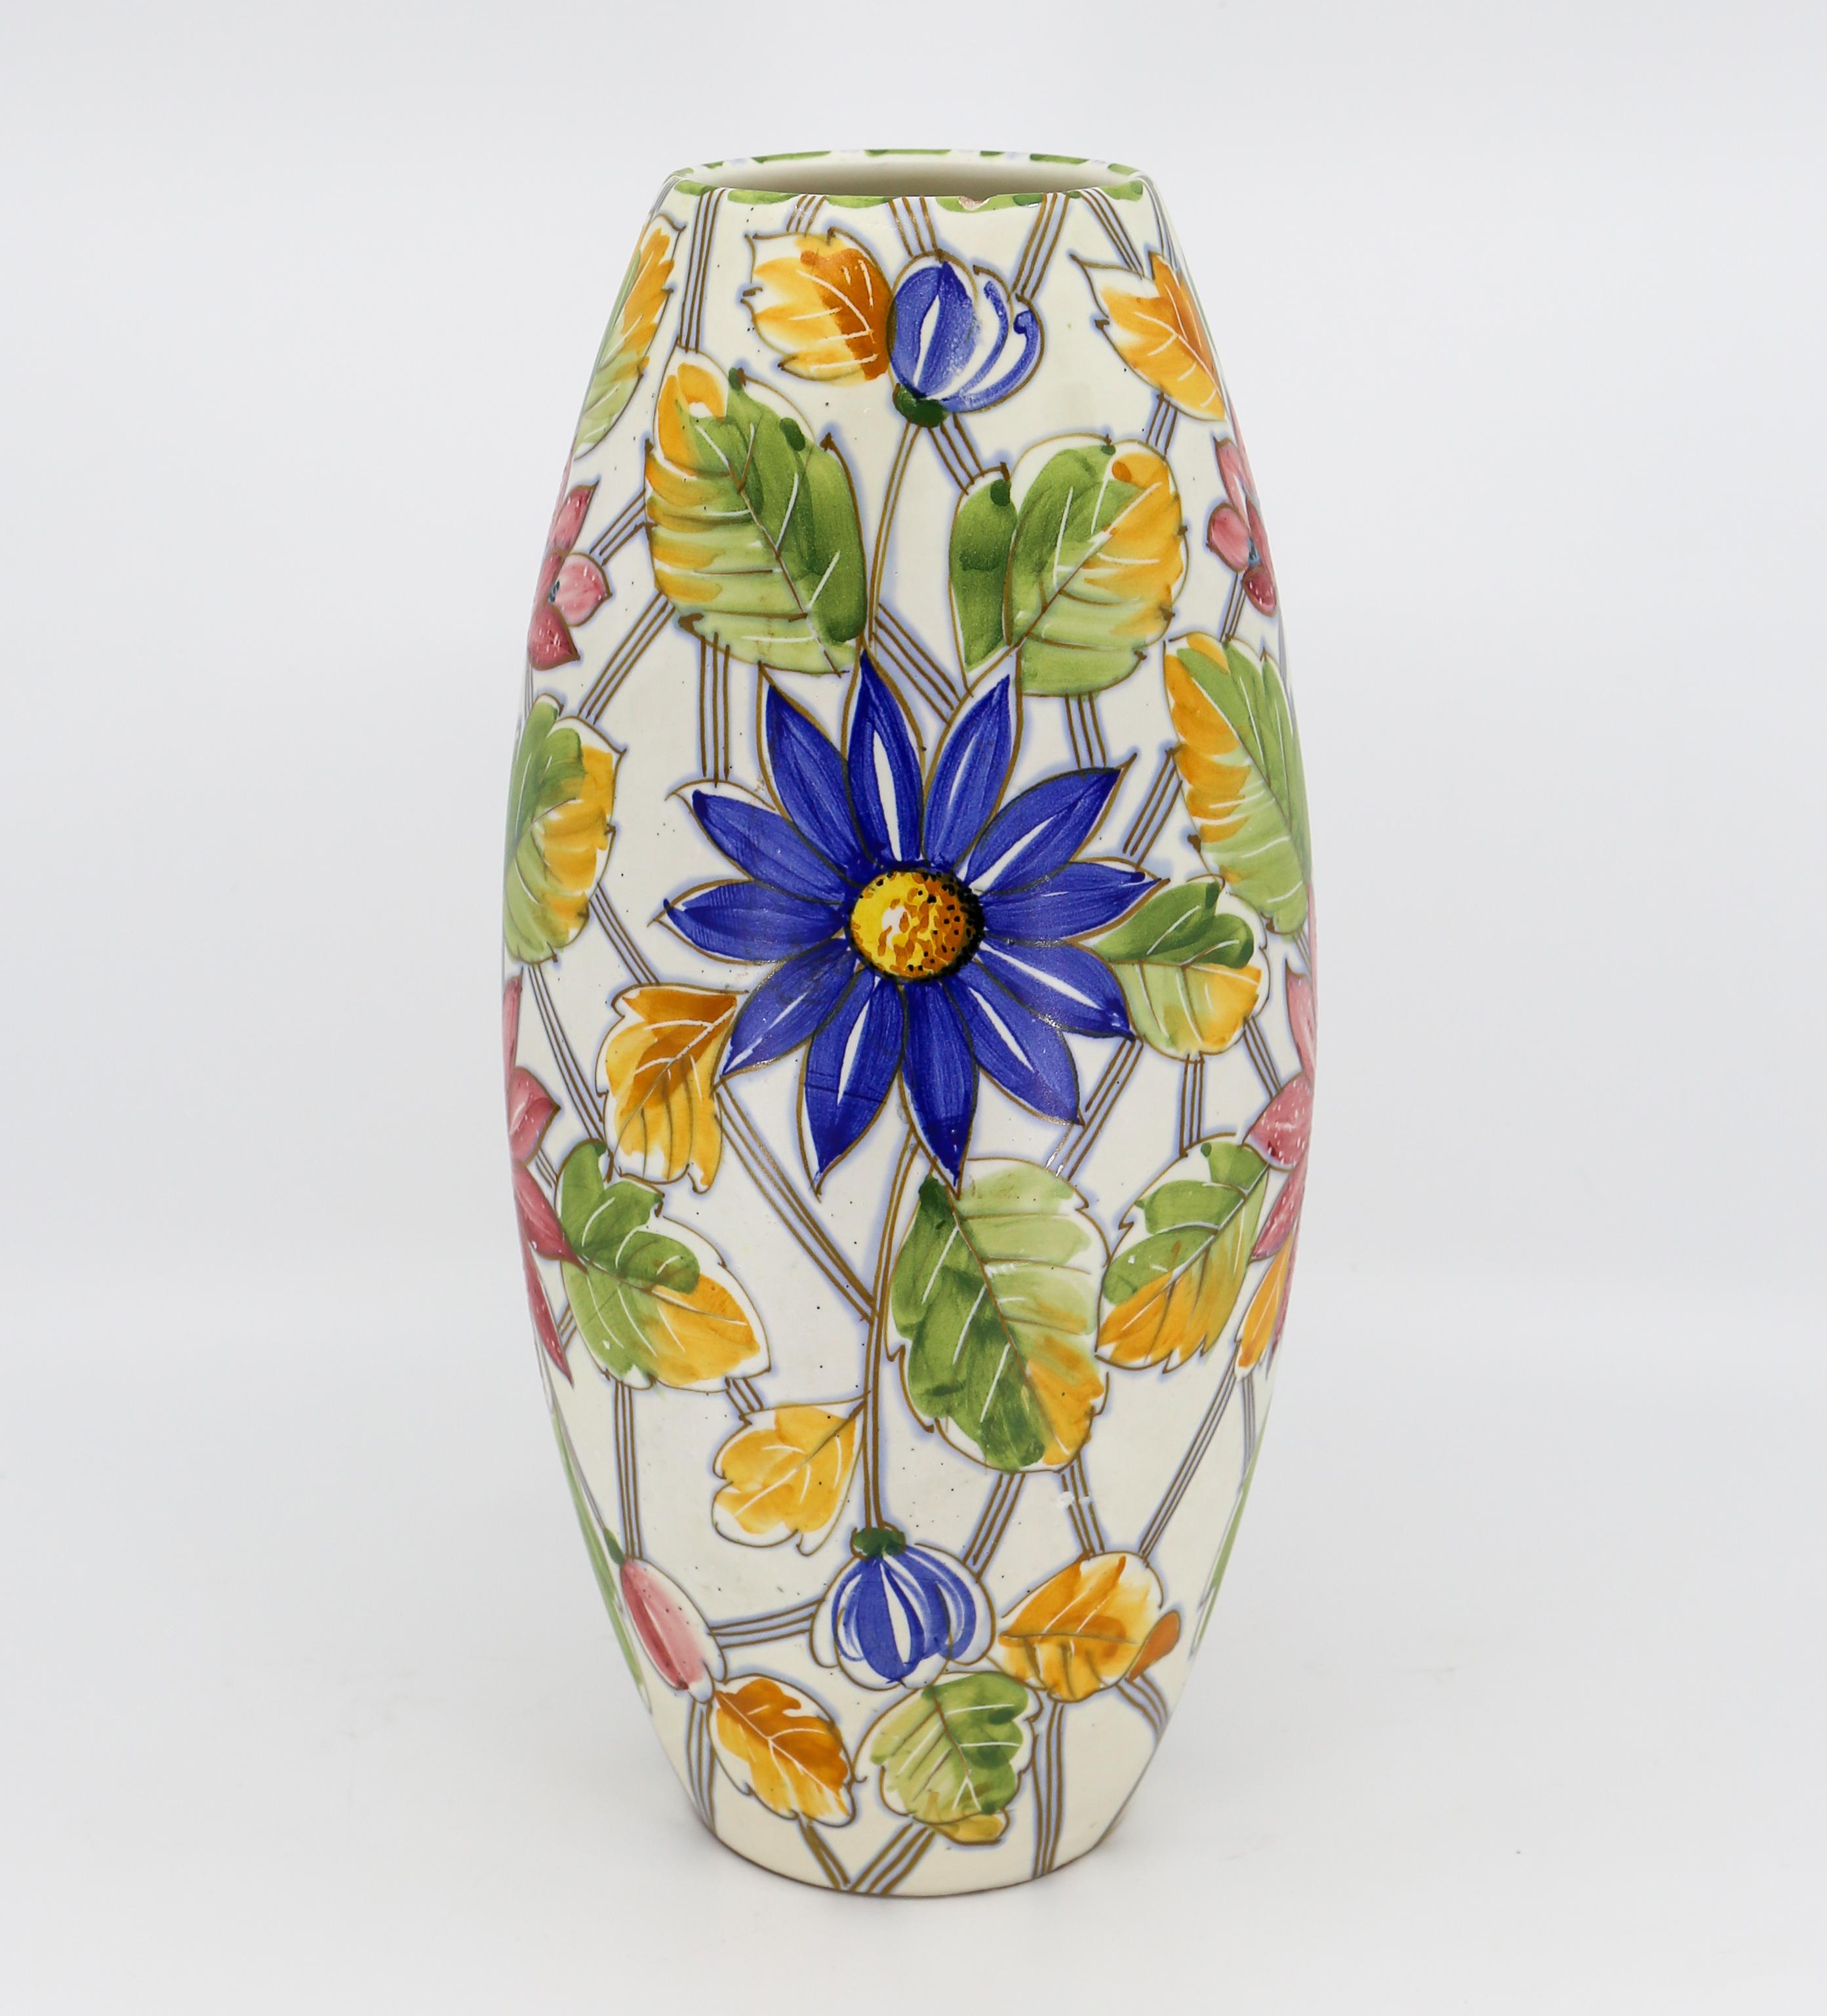 Beautiful Italian oval vase with colored floral motifs.
Height 30 cm.
Diameter 14 cm.